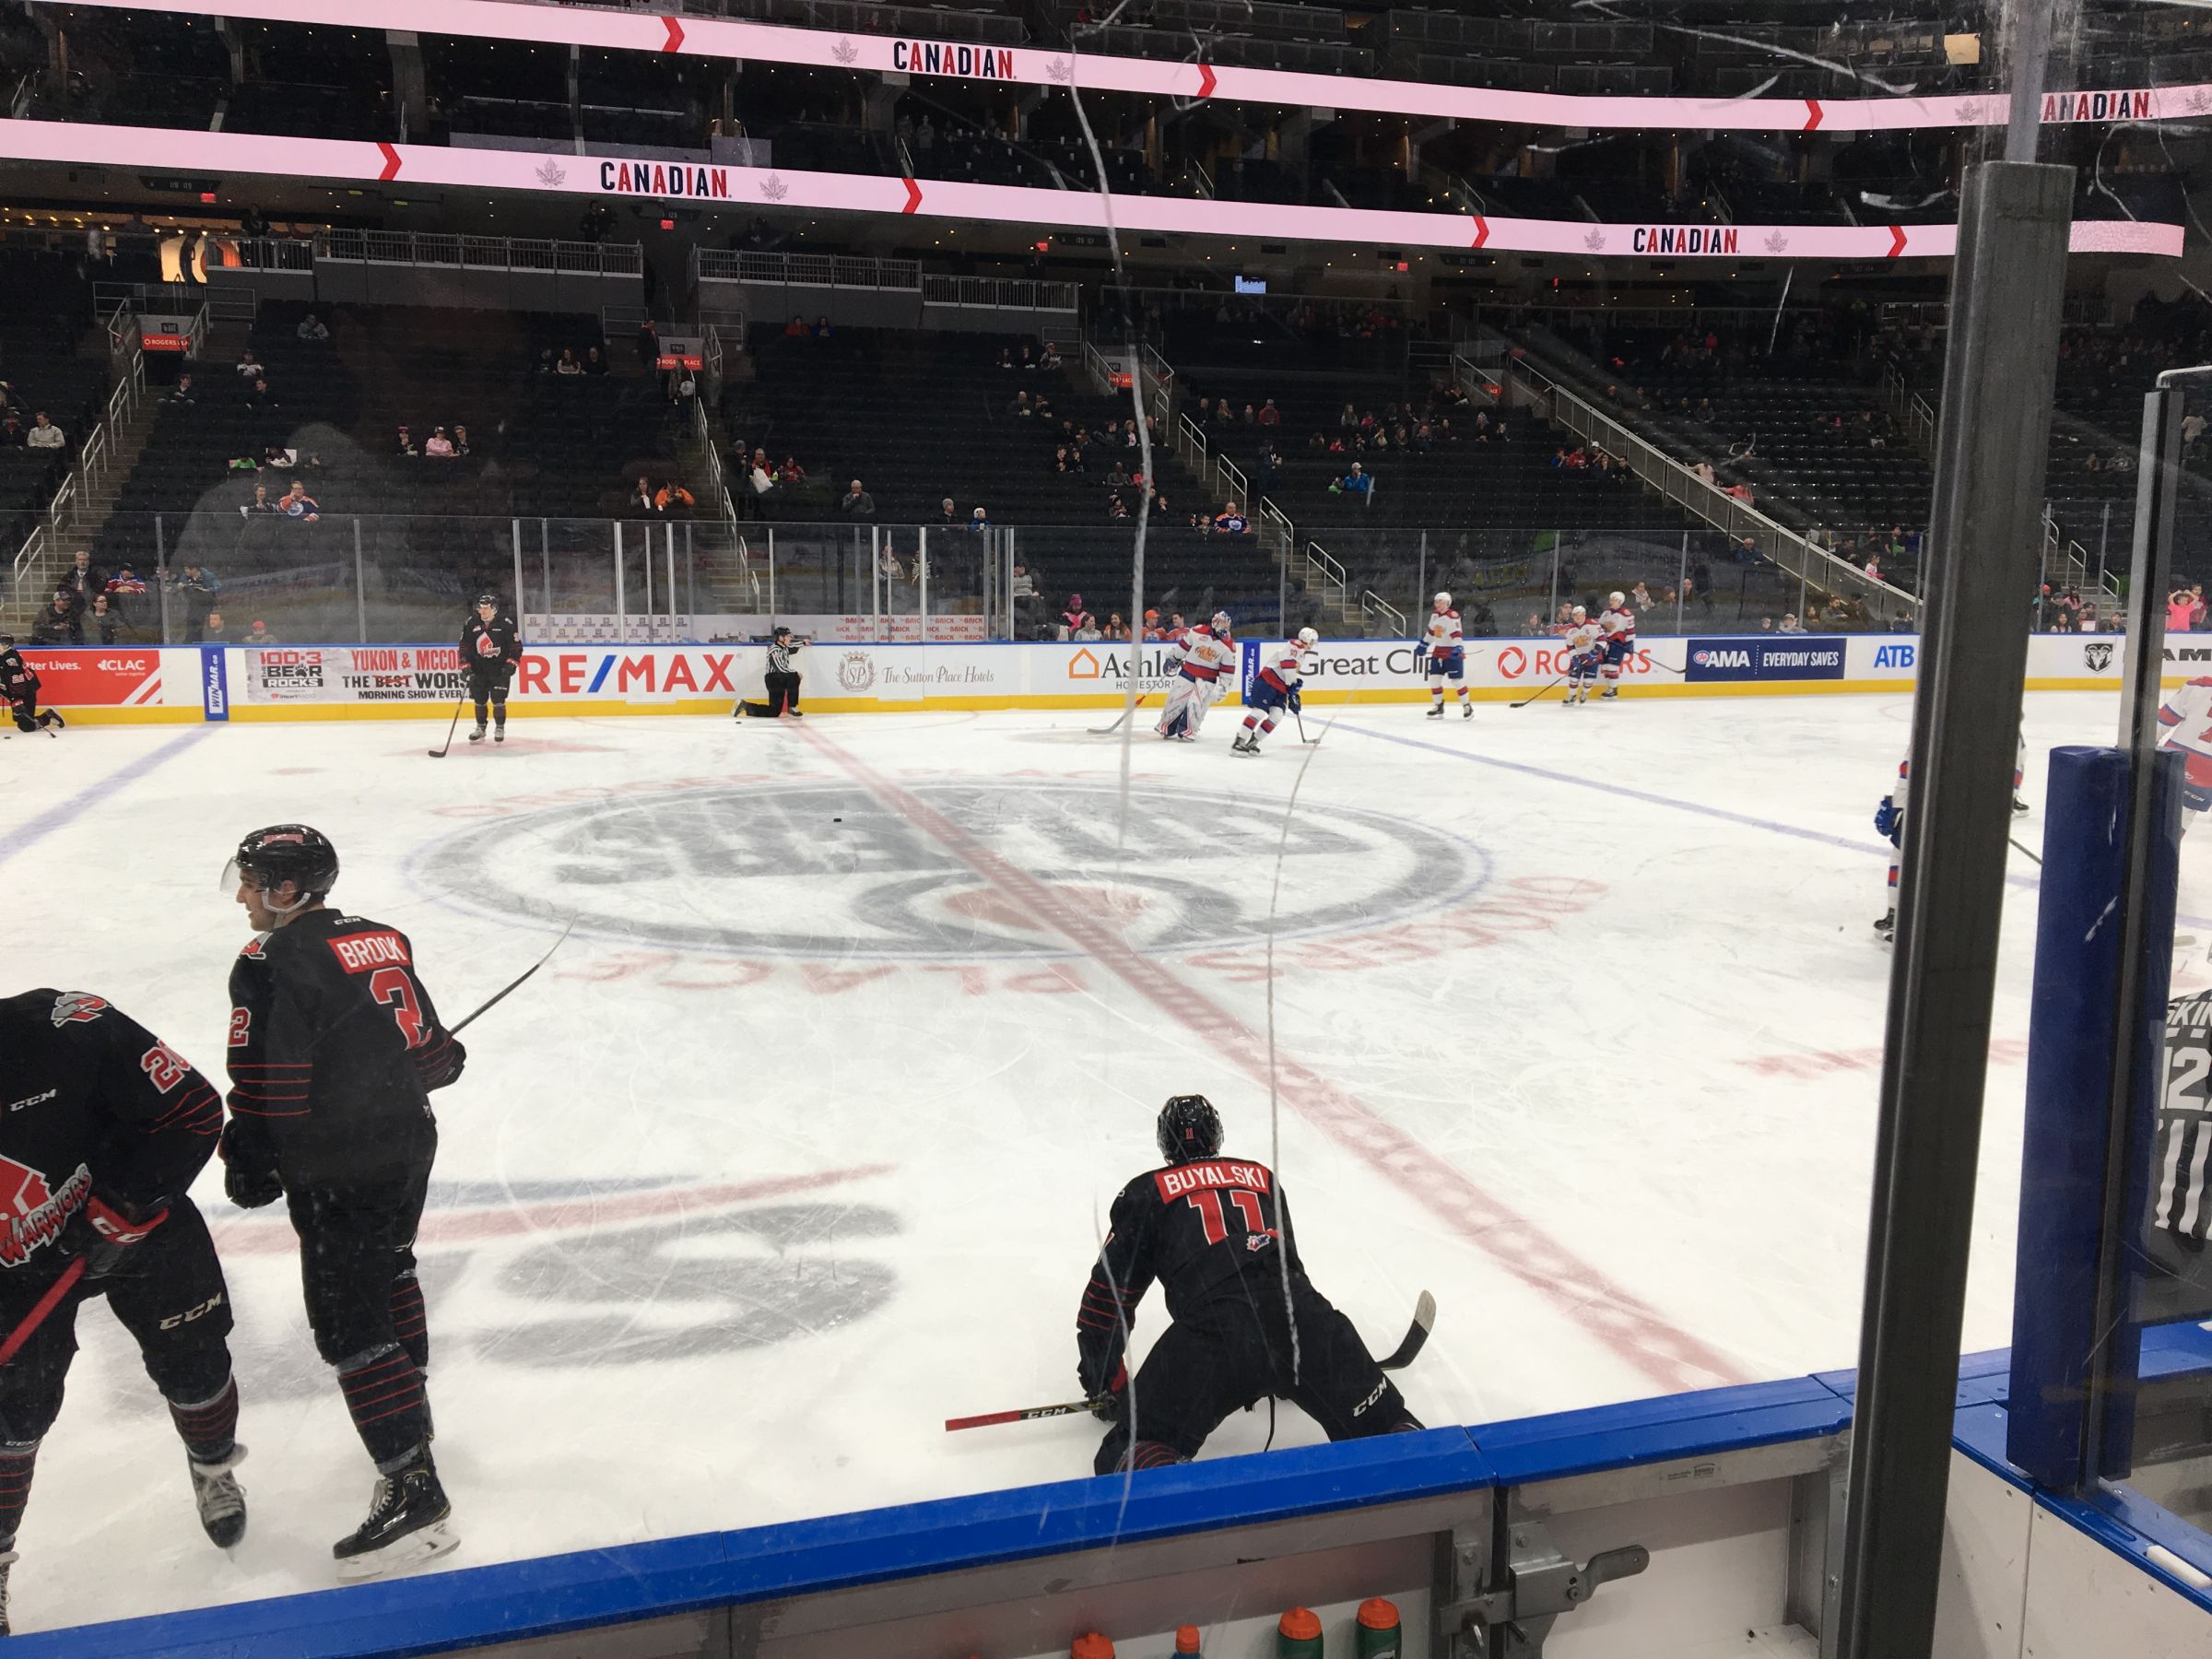 section 103, row 3 seat view  for hockey - rogers place